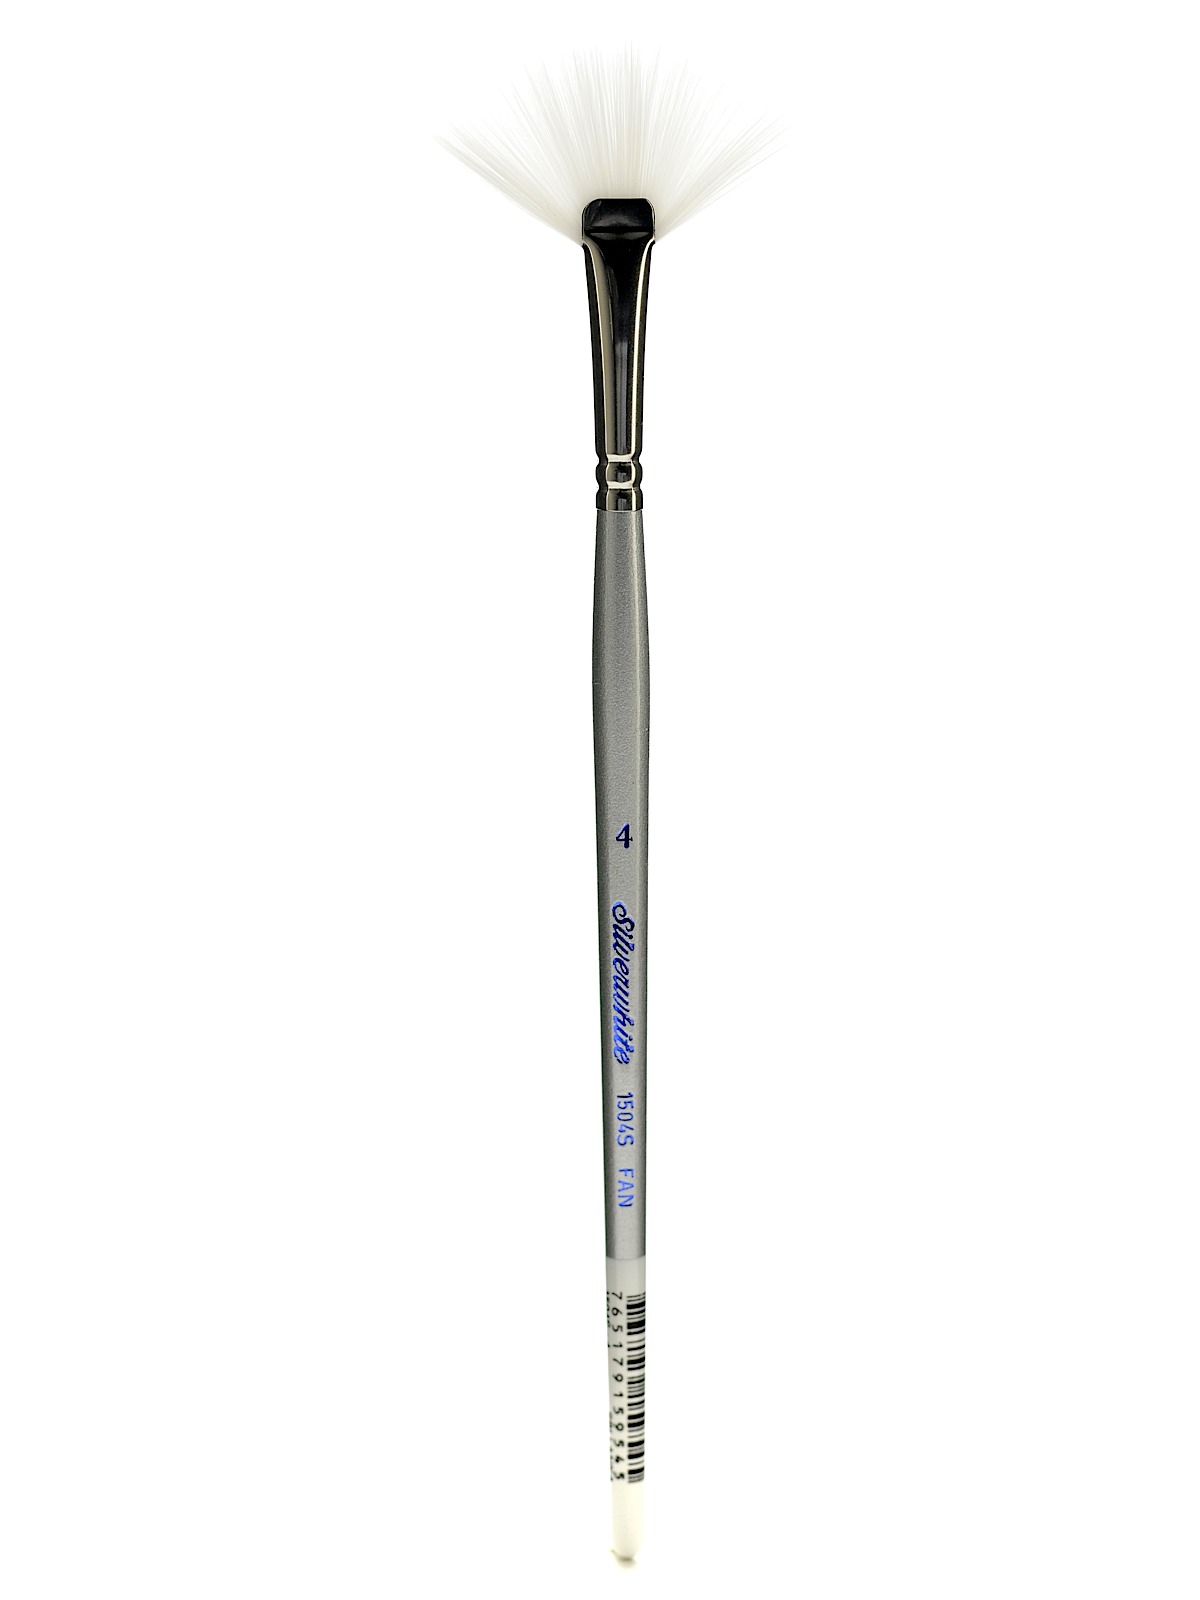 Silverwhite Series Synthetic Brushes Short Handle 4 Fan